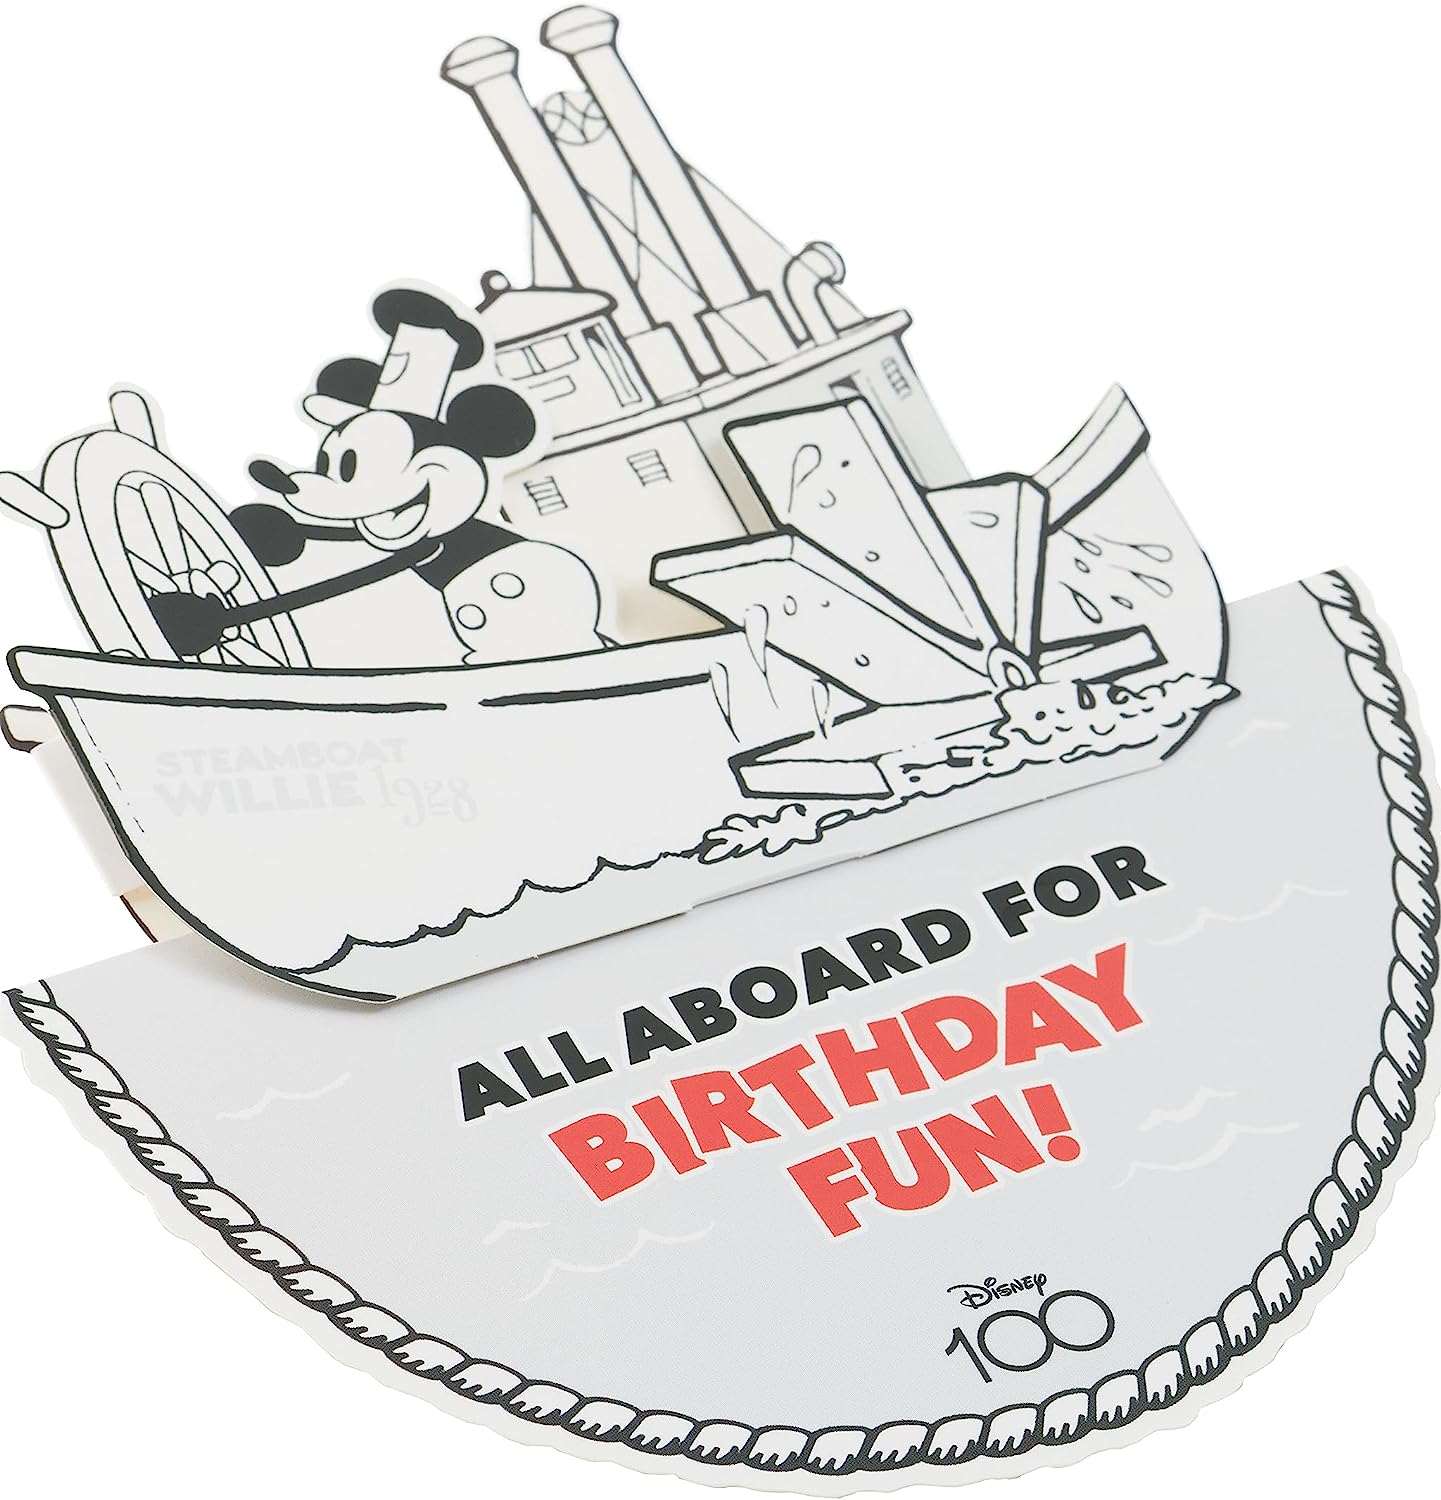 Disney 100 Pop Up Steamboat Willie Mickey Mouse Design Birthday Card